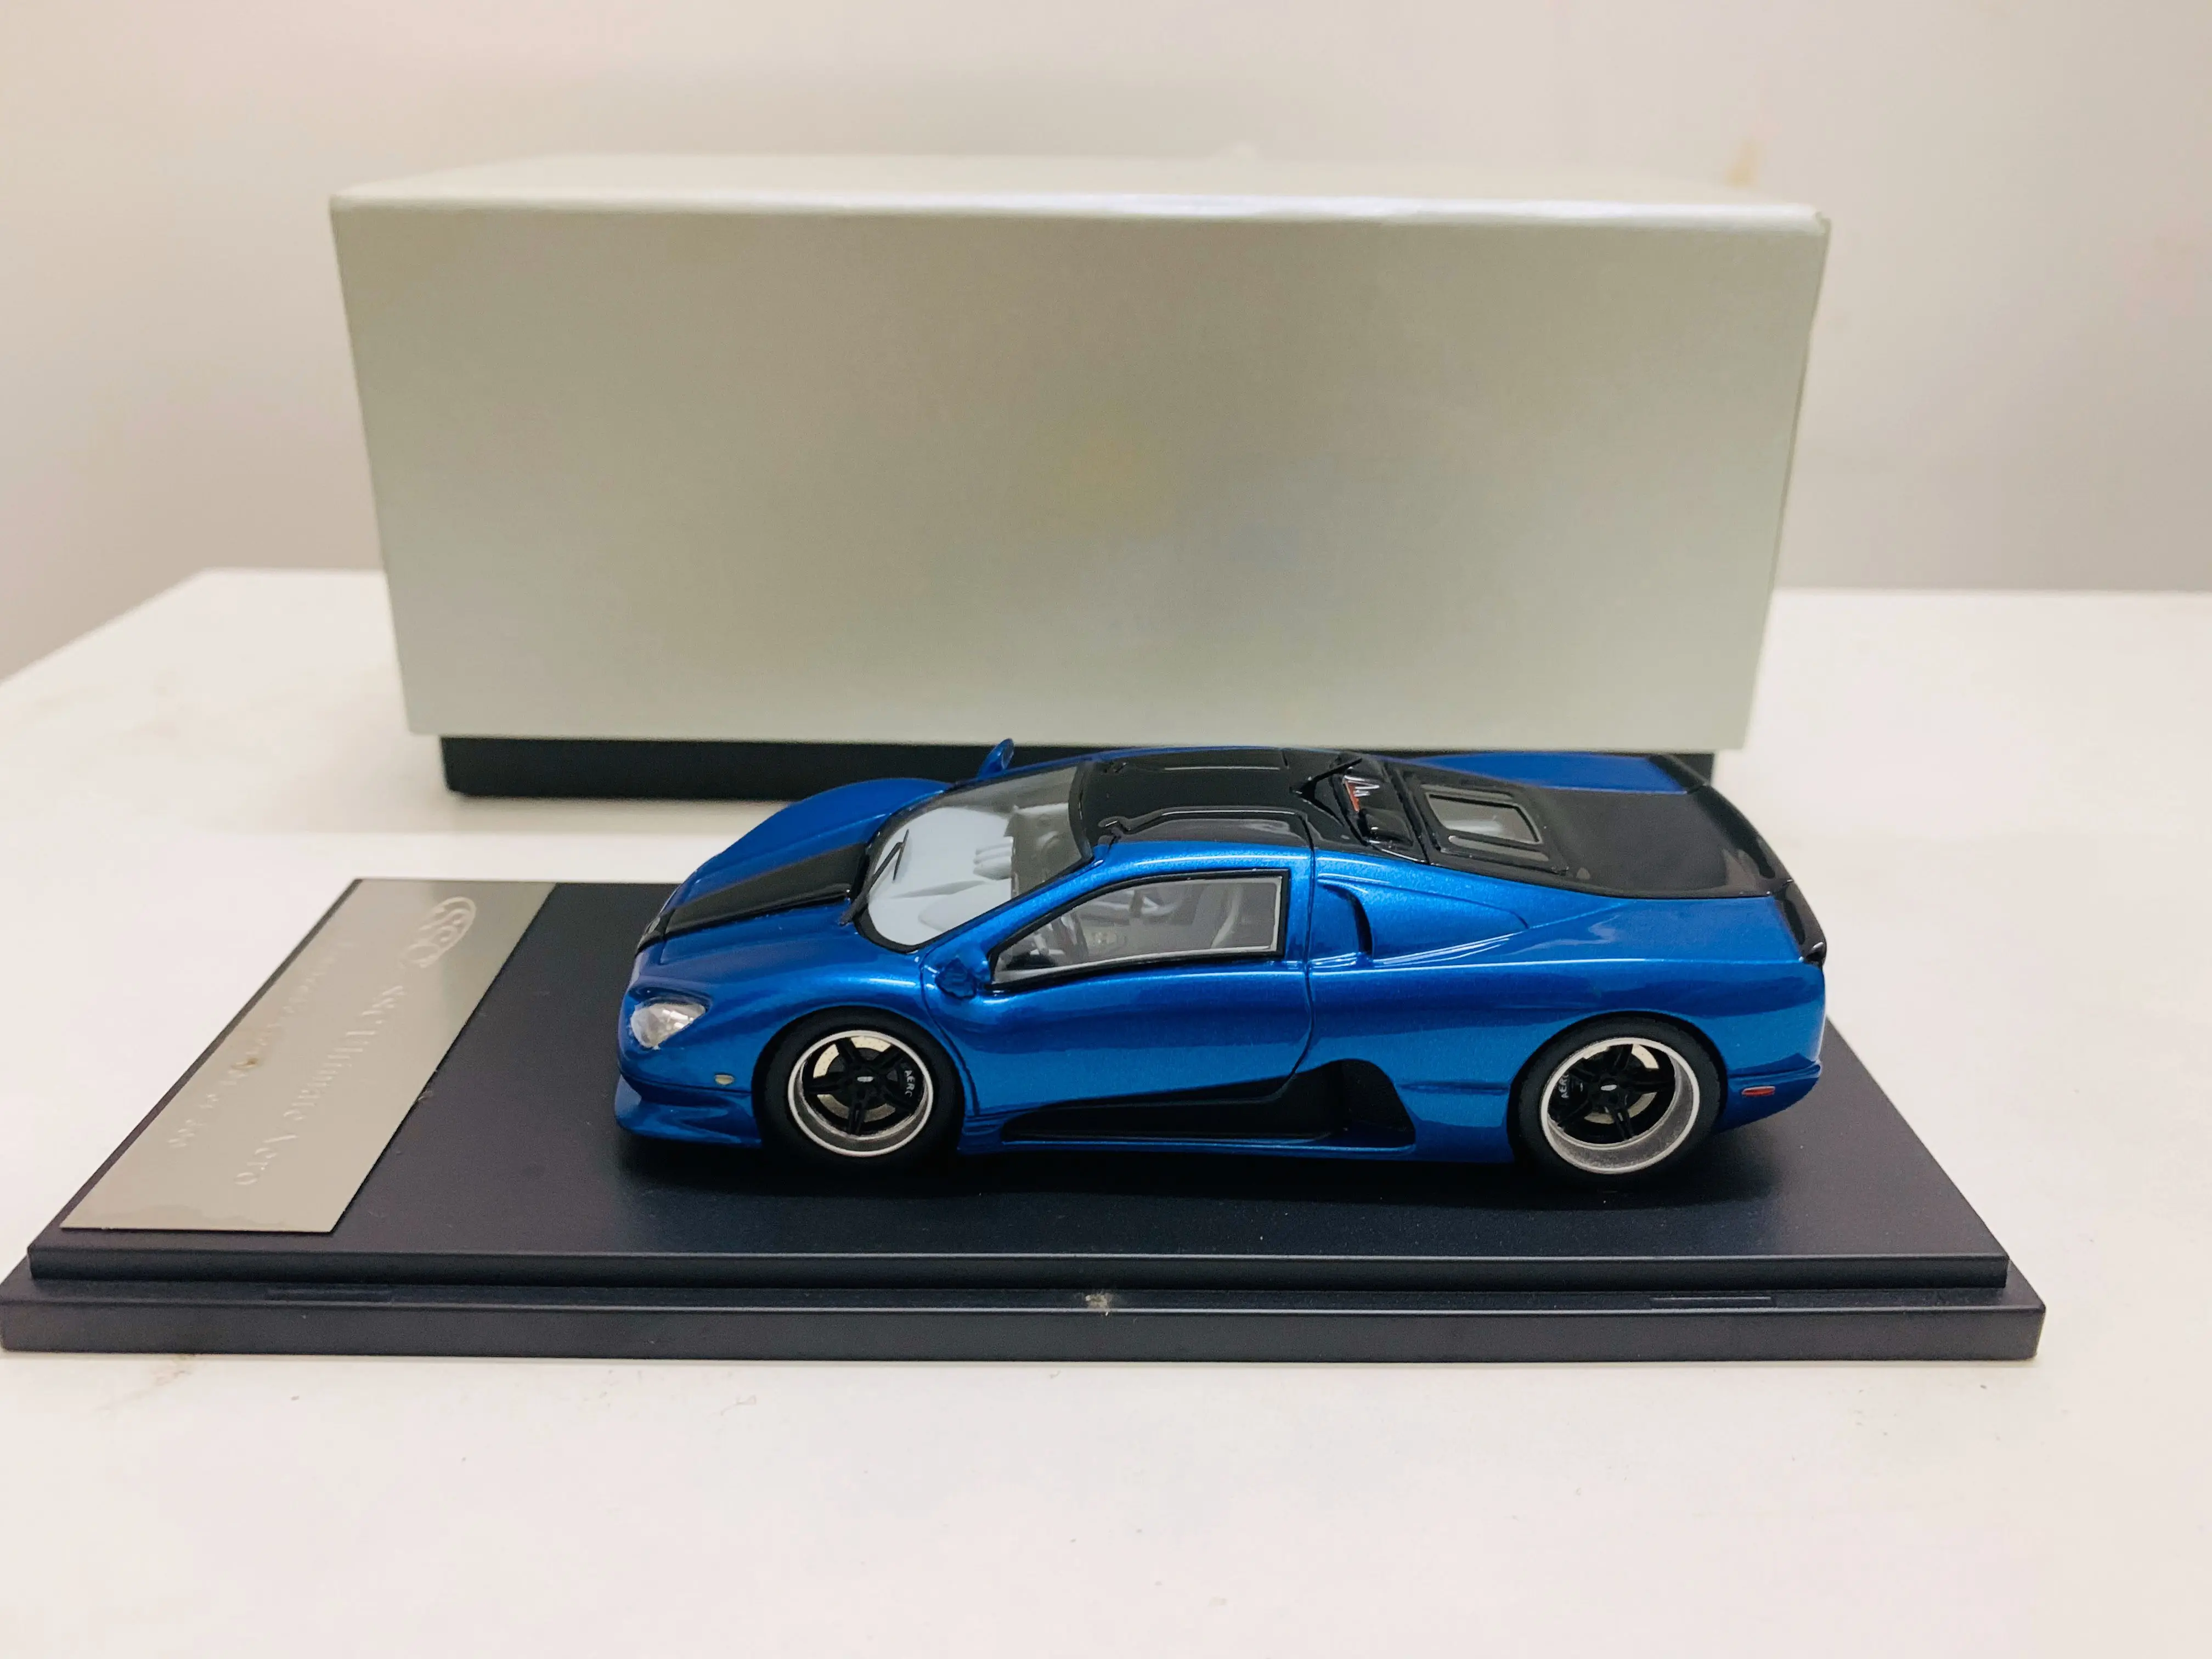 1/43 Scale Resin Model Car SSC Penske Racing Shocks Ultimate Aero Blue New in Box aoshima 1 12 scale monkey 125 blue diecast model motorcycle car toys gifts